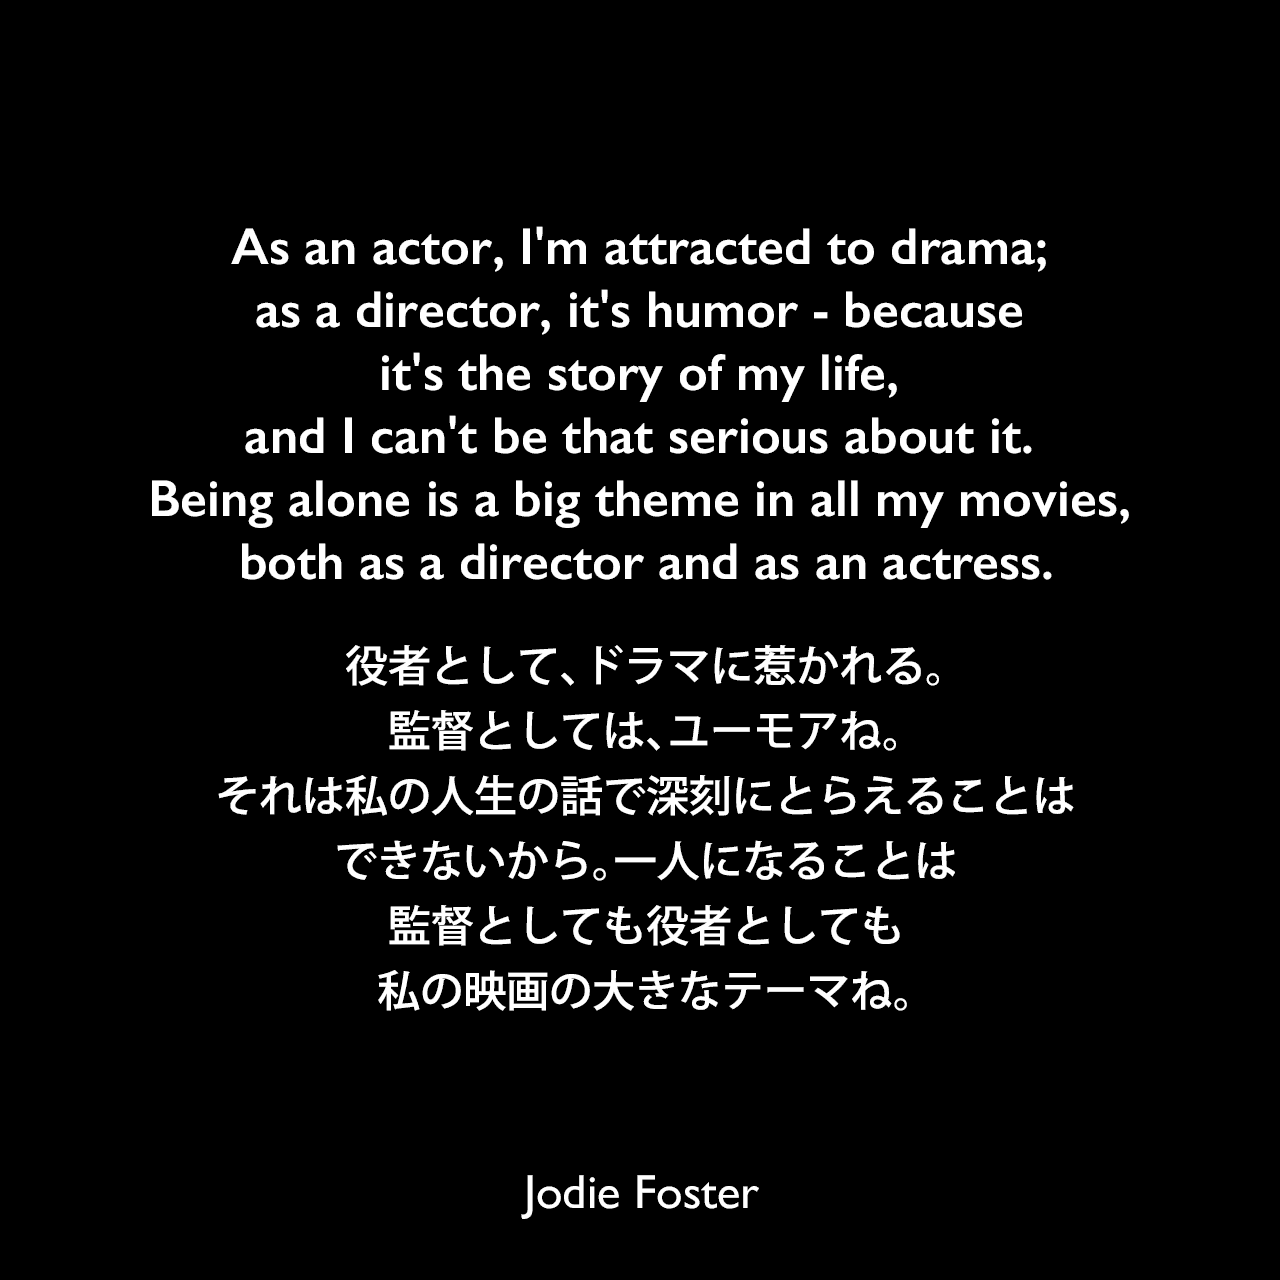 As an actor, I'm attracted to drama; as a director, it's humor - because it's the story of my life, and I can't be that serious about it. Being alone is a big theme in all my movies, both as a director and as an actress.役者として、ドラマに惹かれる。監督としては、ユーモアね。それは私の人生の話で深刻にとらえることはできないから。一人になることは、監督としても役者としても私の映画の大きなテーマね。Jodie Foster